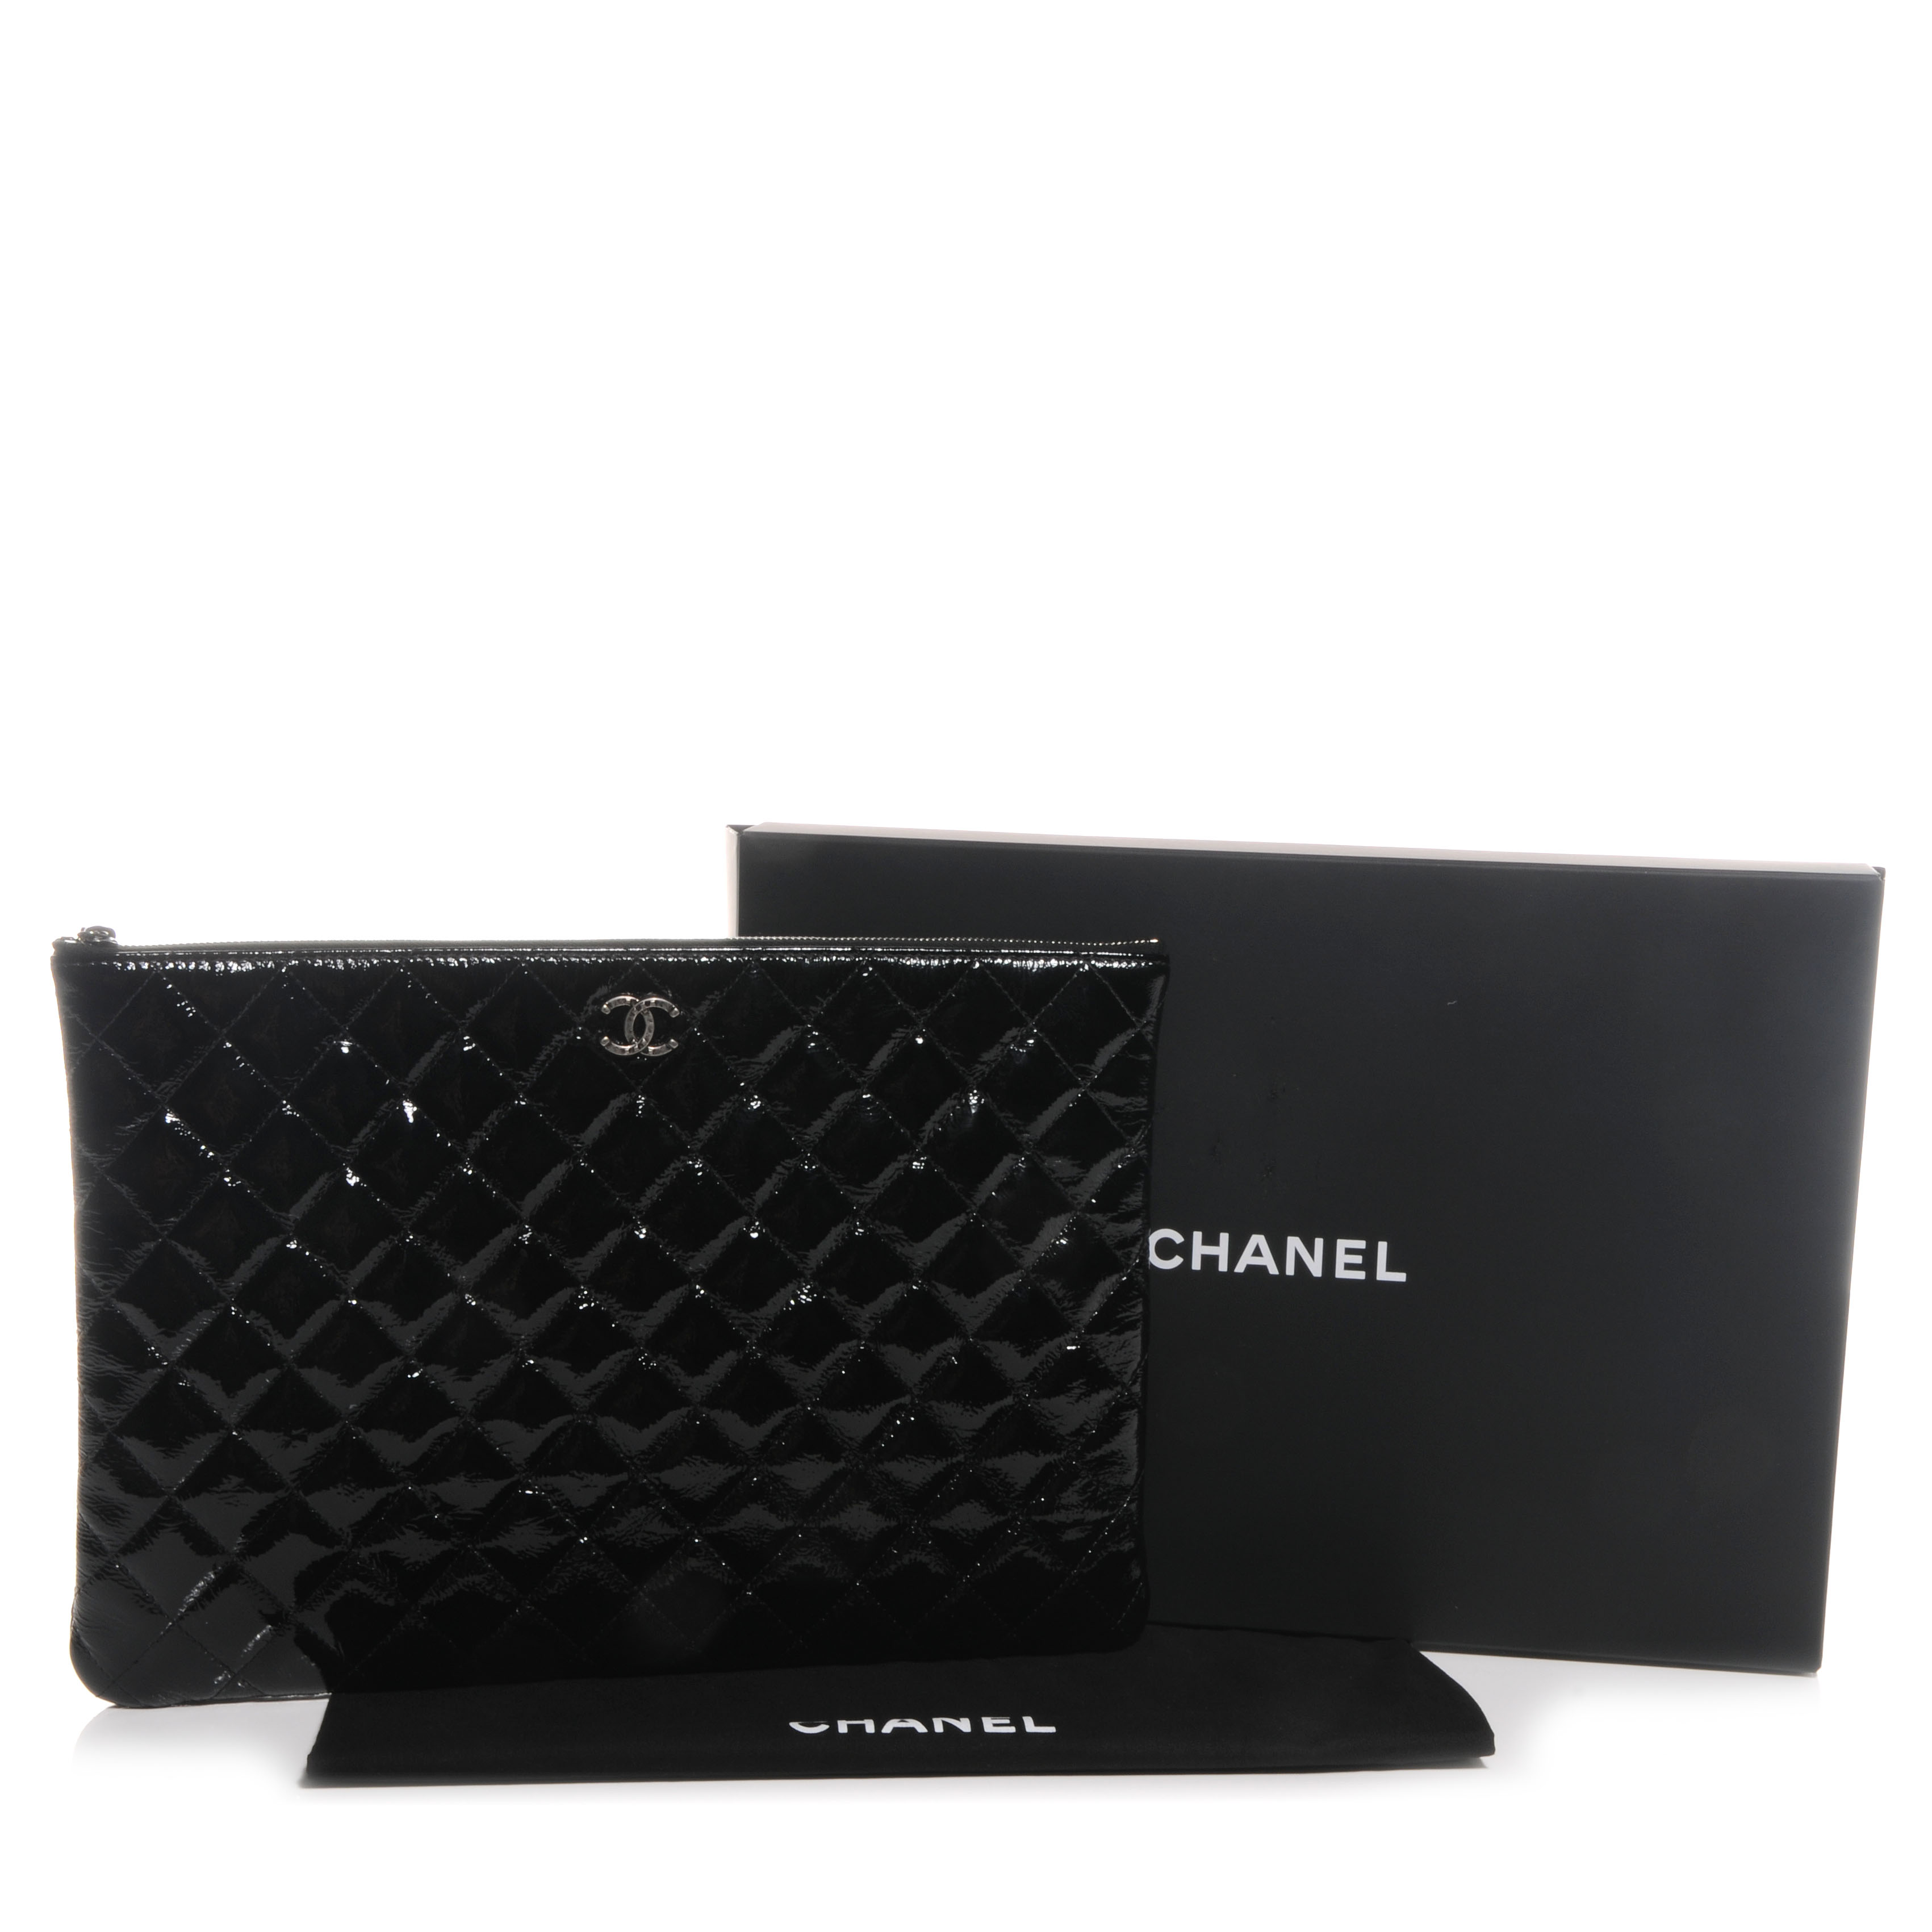 CHANEL Patent Quilted Large Cosmetic Case Black 64775 | FASHIONPHILE